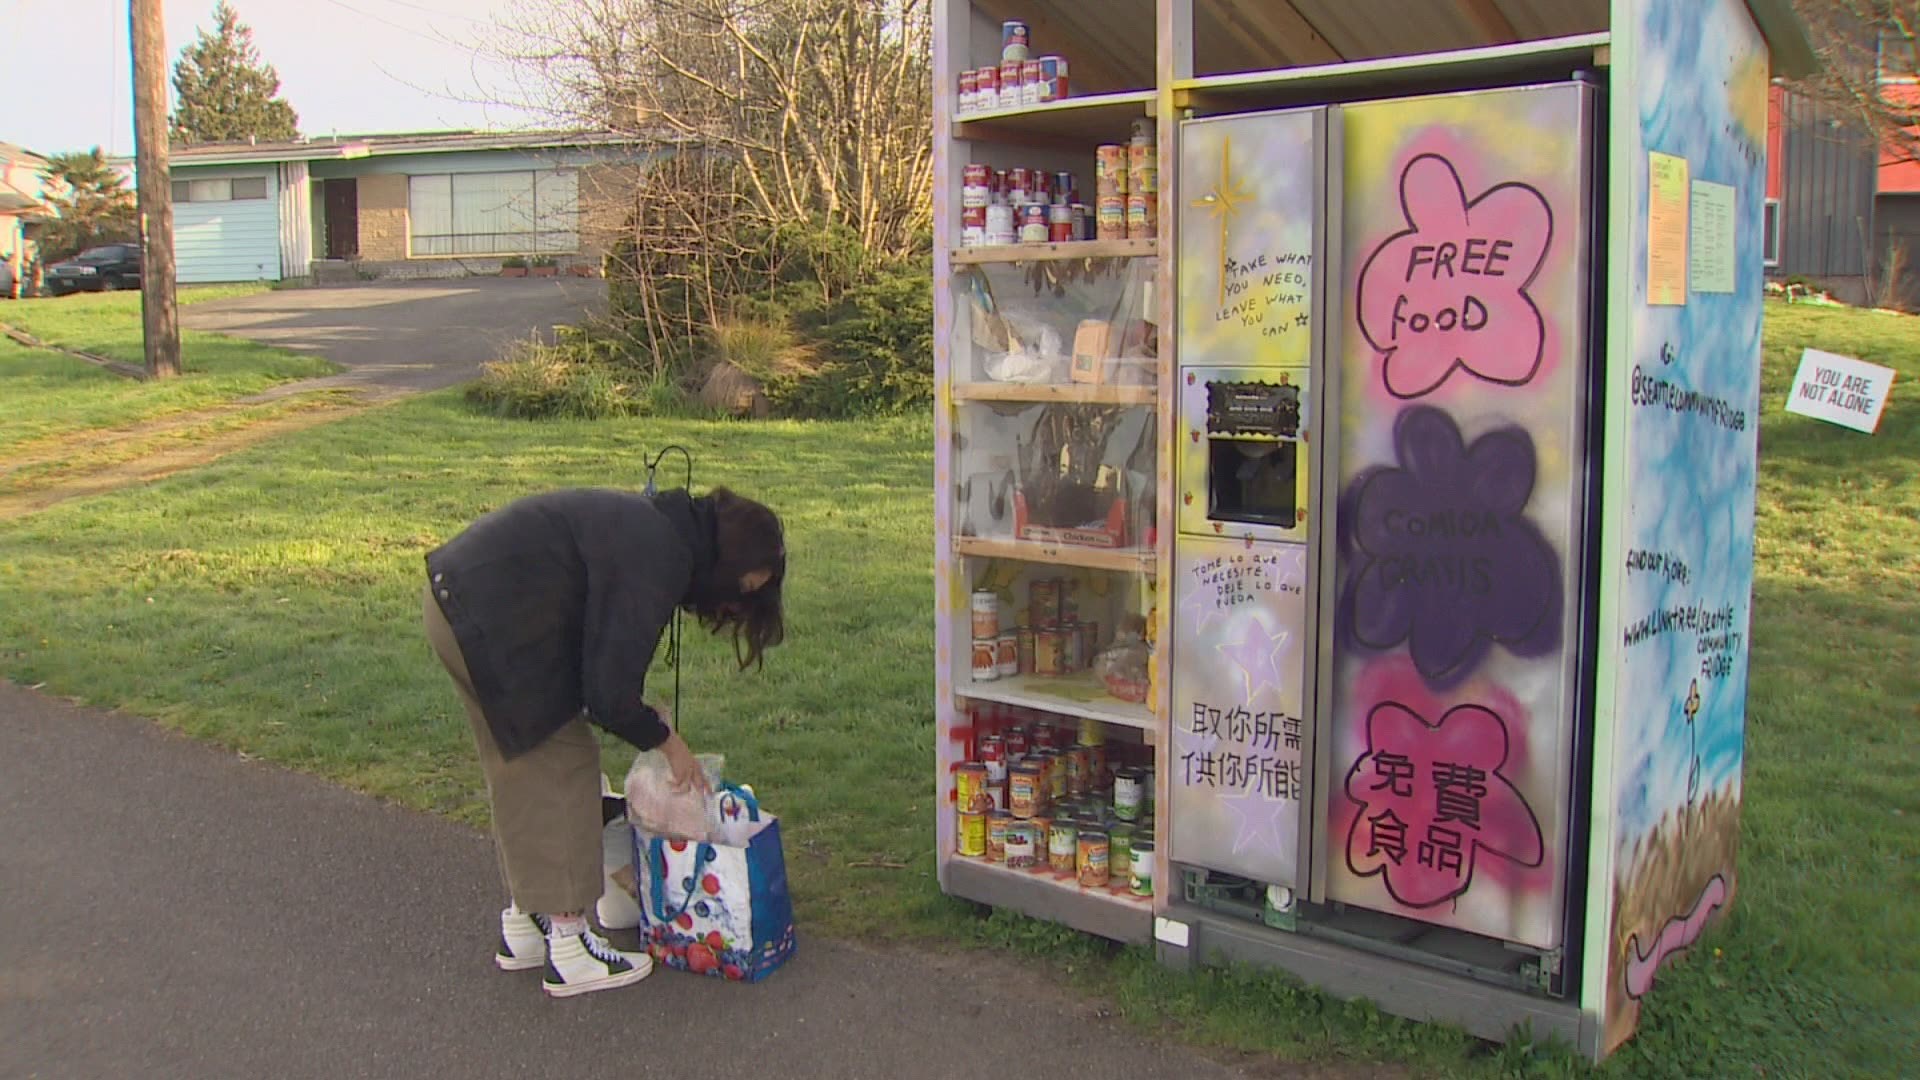 Similar to free libraries, community refrigerators offer walk up, free food to those in need, provided by volunteers.